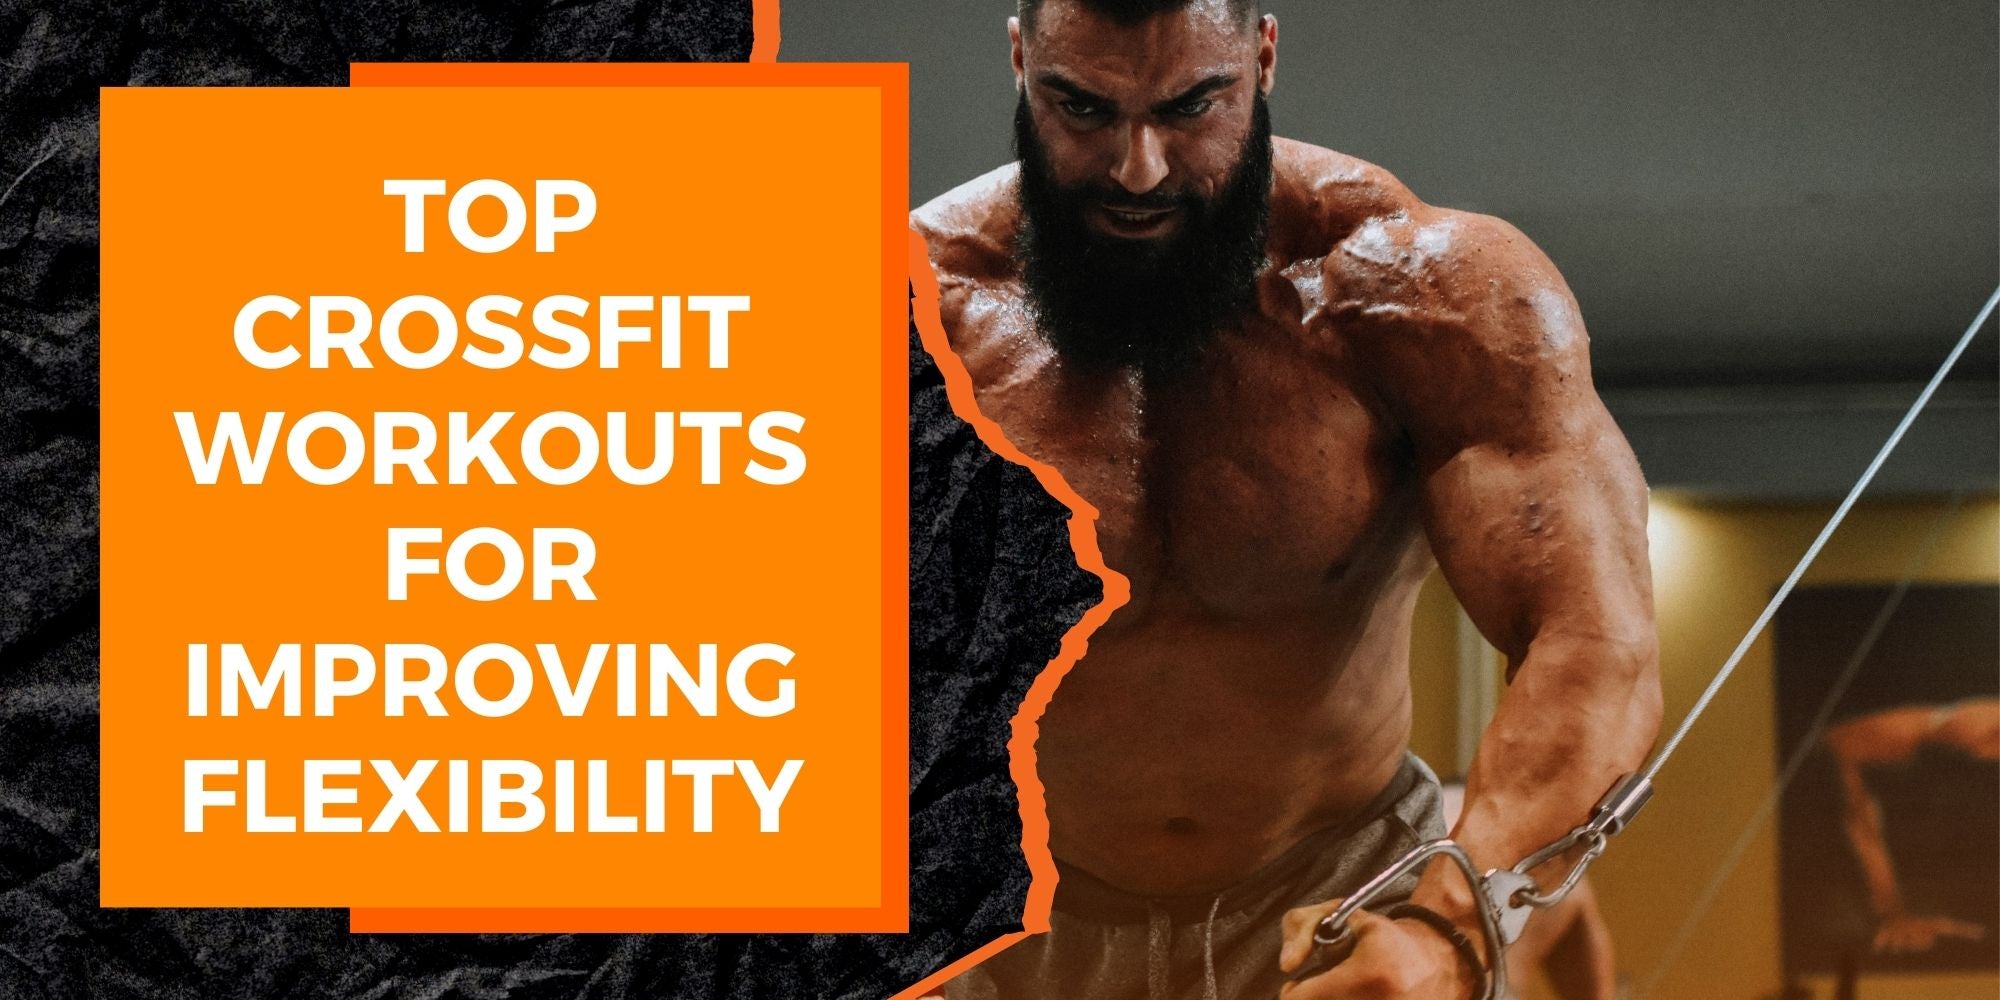 Top CrossFit Workouts for Improving Flexibility